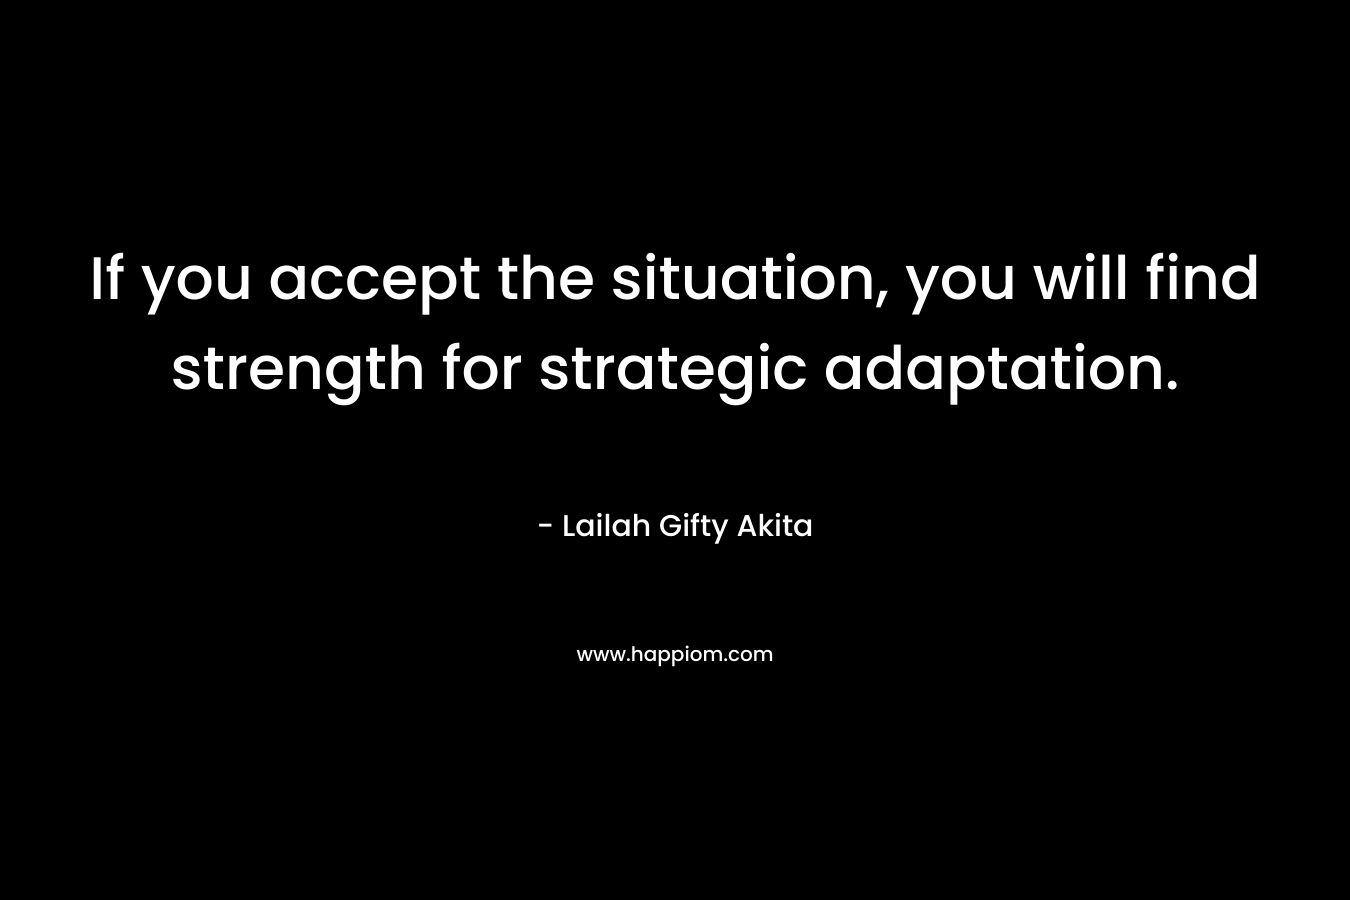 If you accept the situation, you will find strength for strategic adaptation. – Lailah Gifty Akita